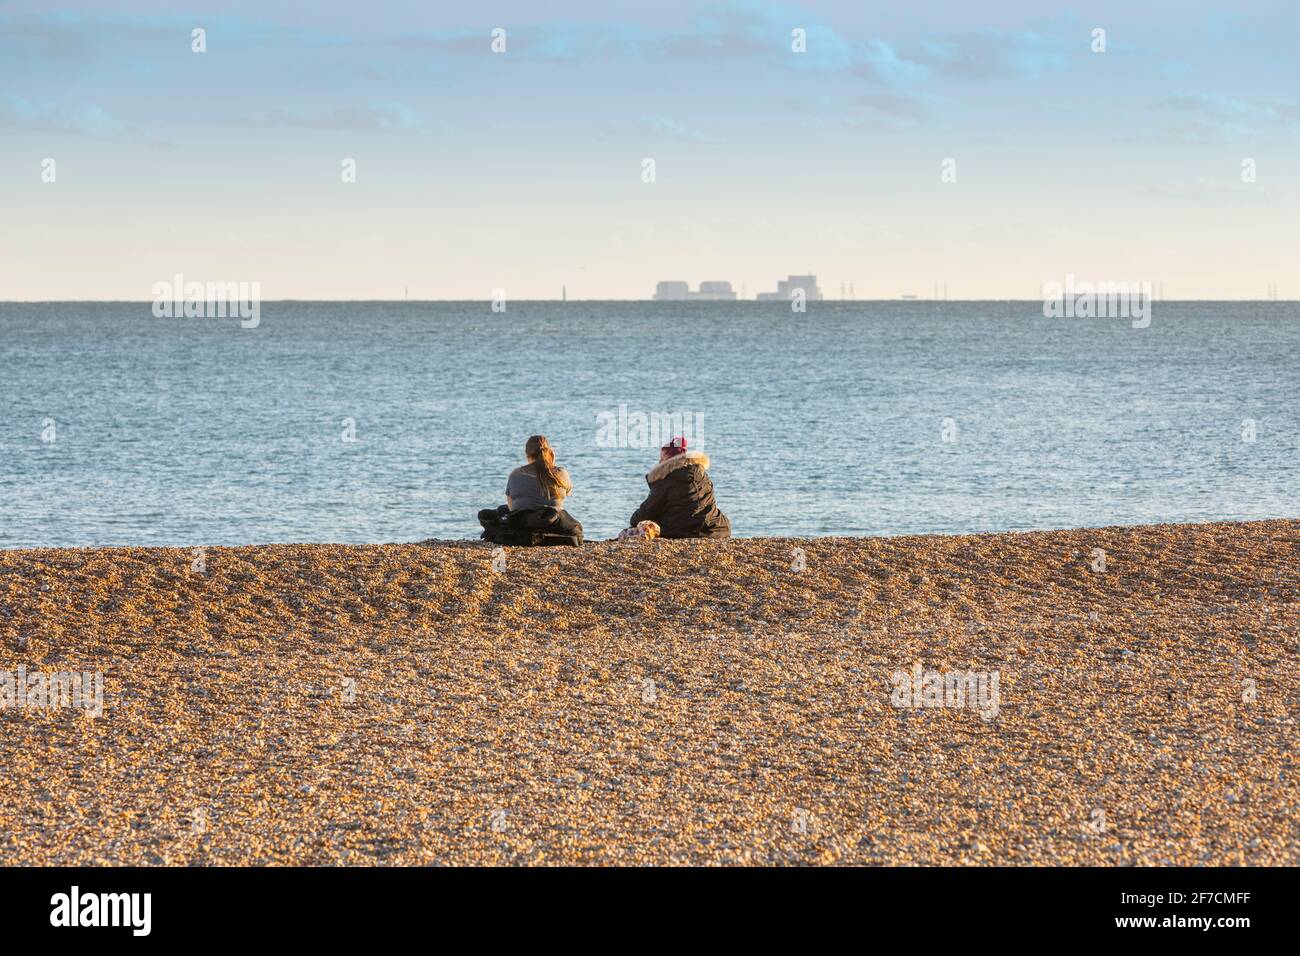 Two young women alone on a shingle beach during covid lockdown Stock Photo